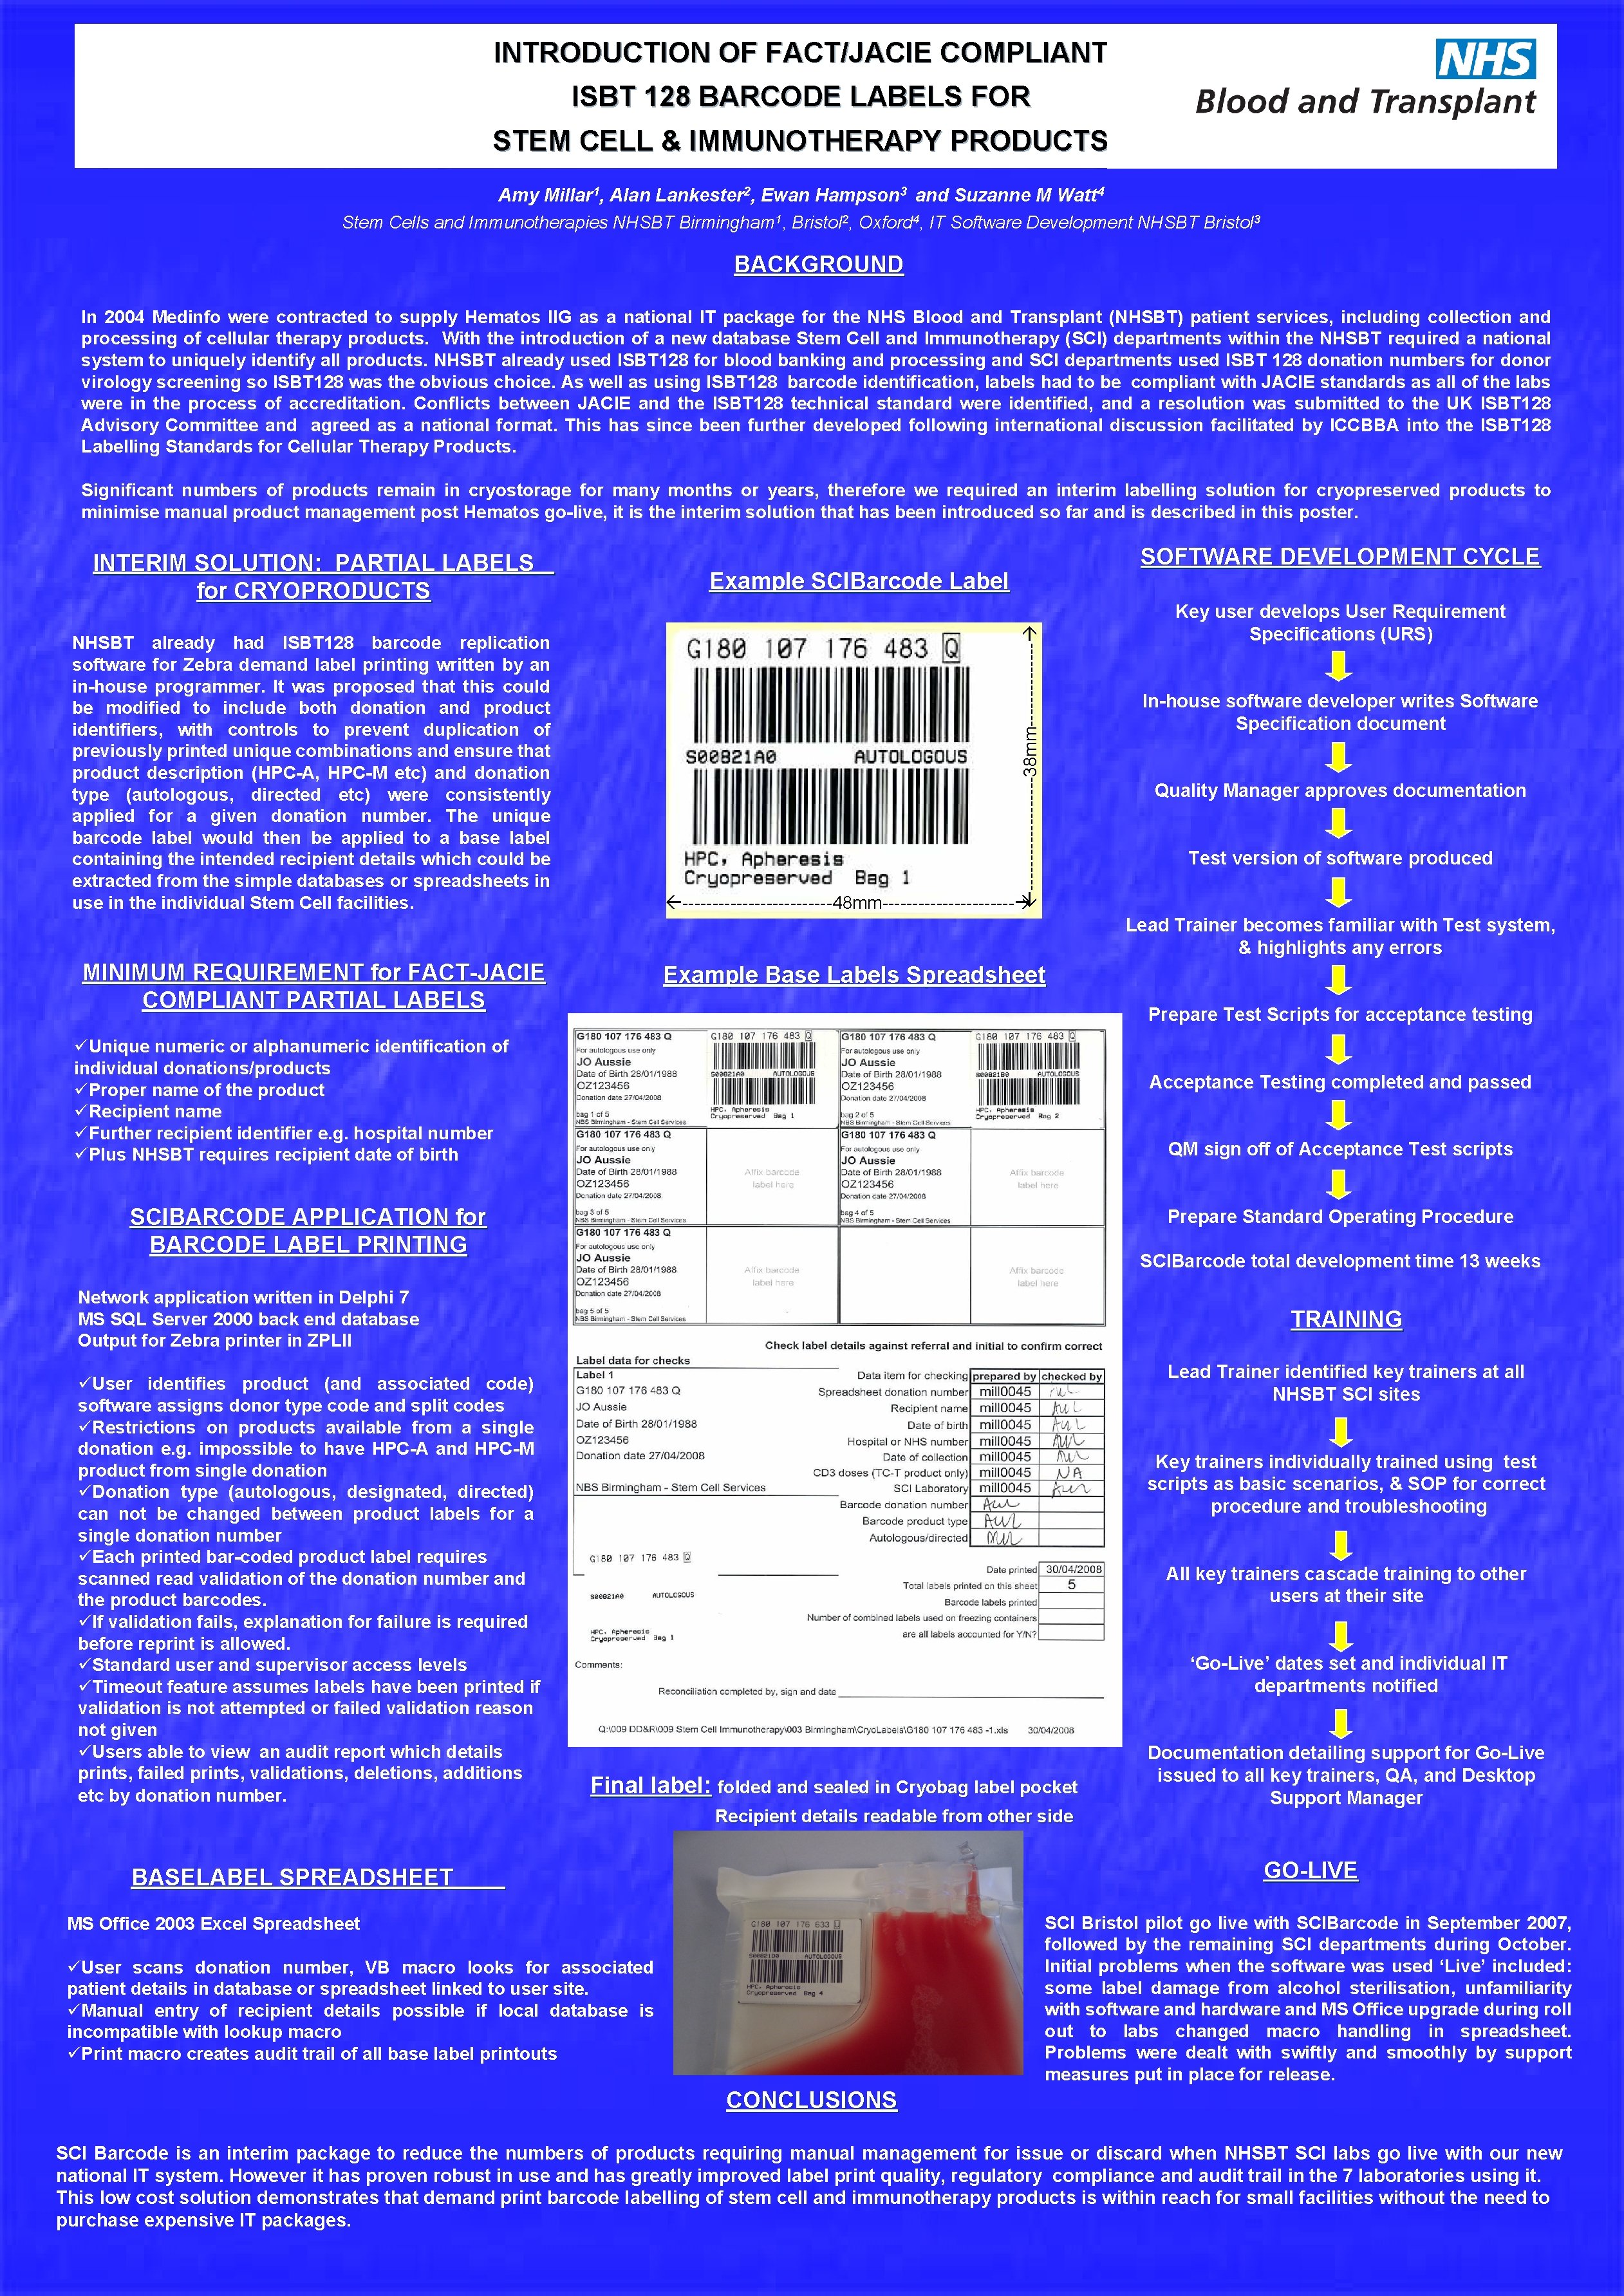 INTRODUCTION OF FACT/JACIE COMPLIANT ISBT 128 BARCODE LABELS FOR STEM CELL & IMMUNOTHERAPY PRODUCTS